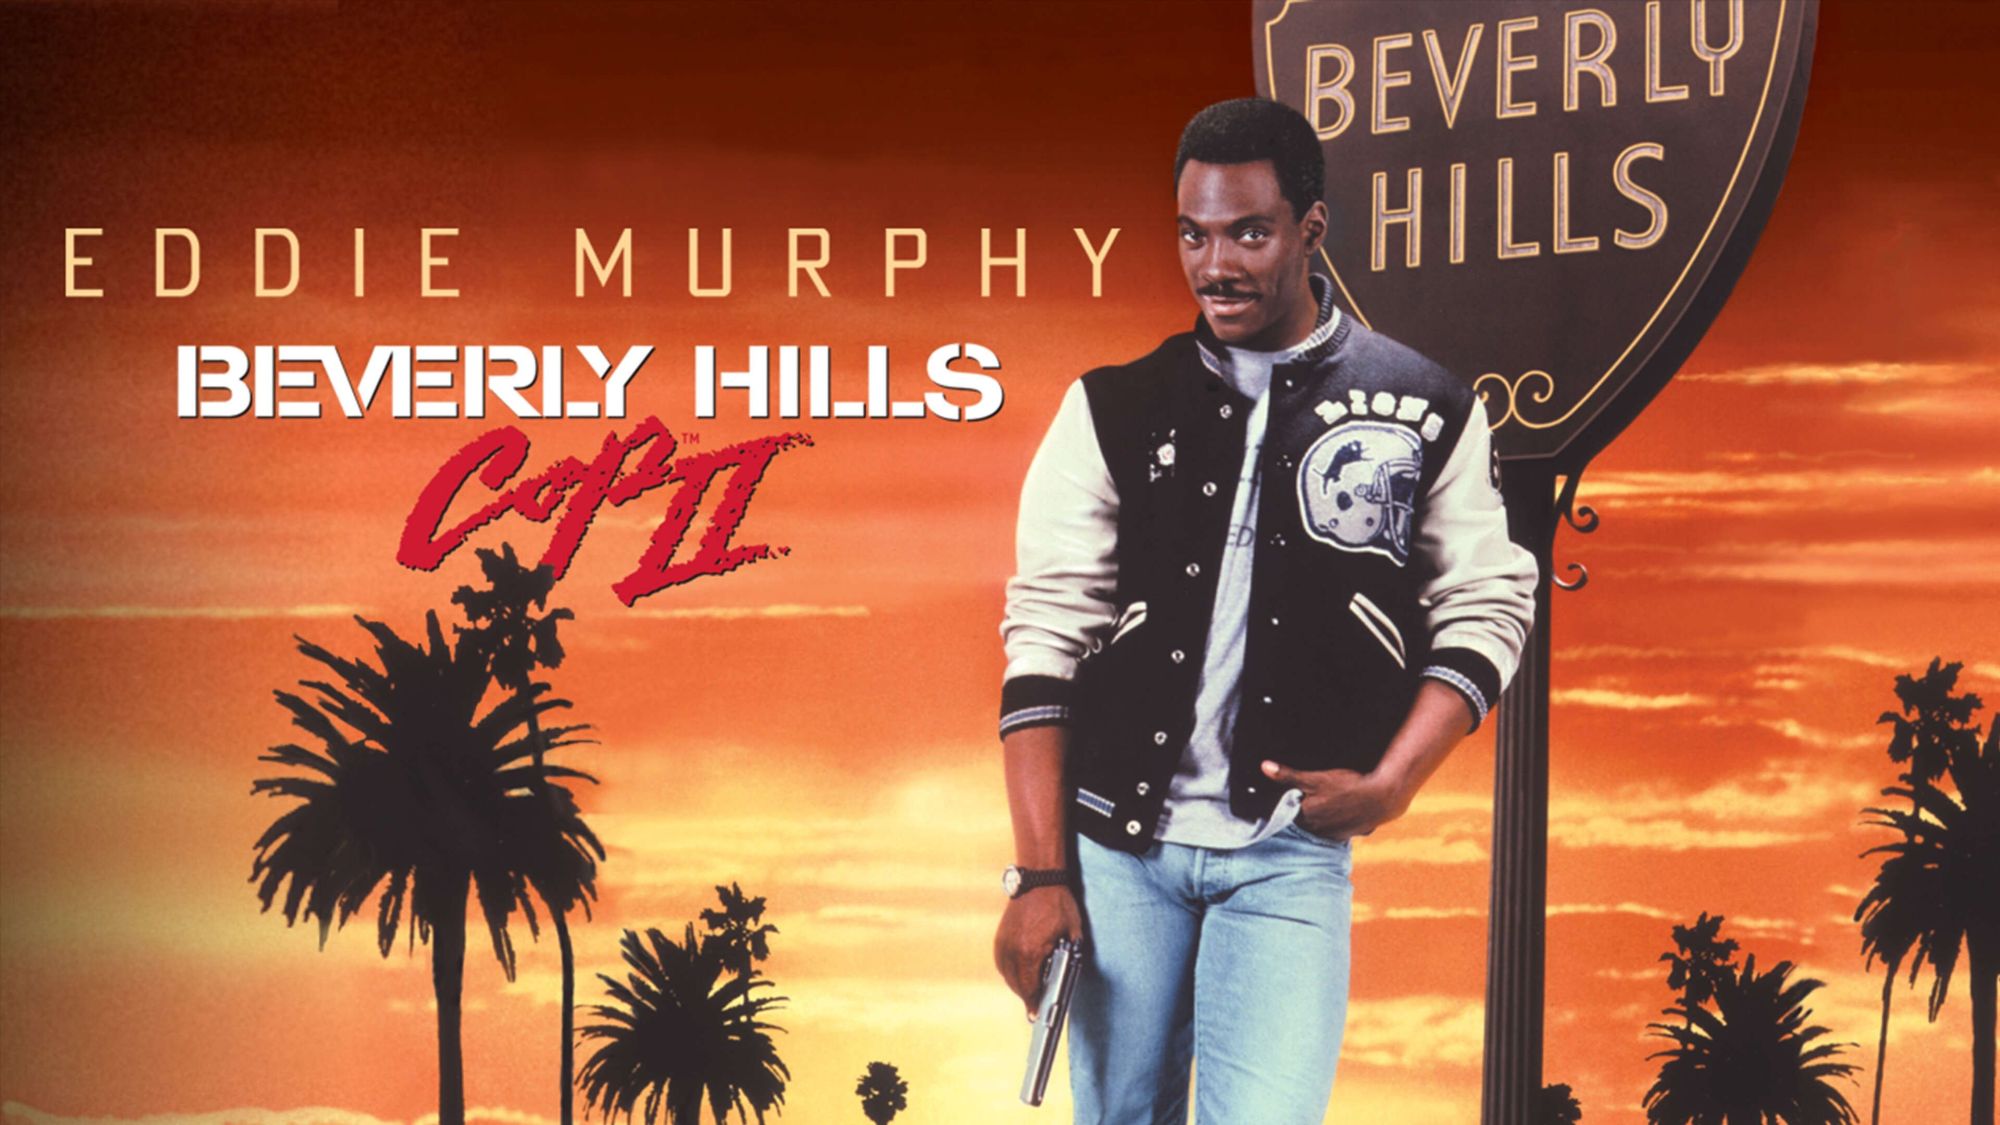 35-facts-about-the-movie-beverly-hills-cop-ii